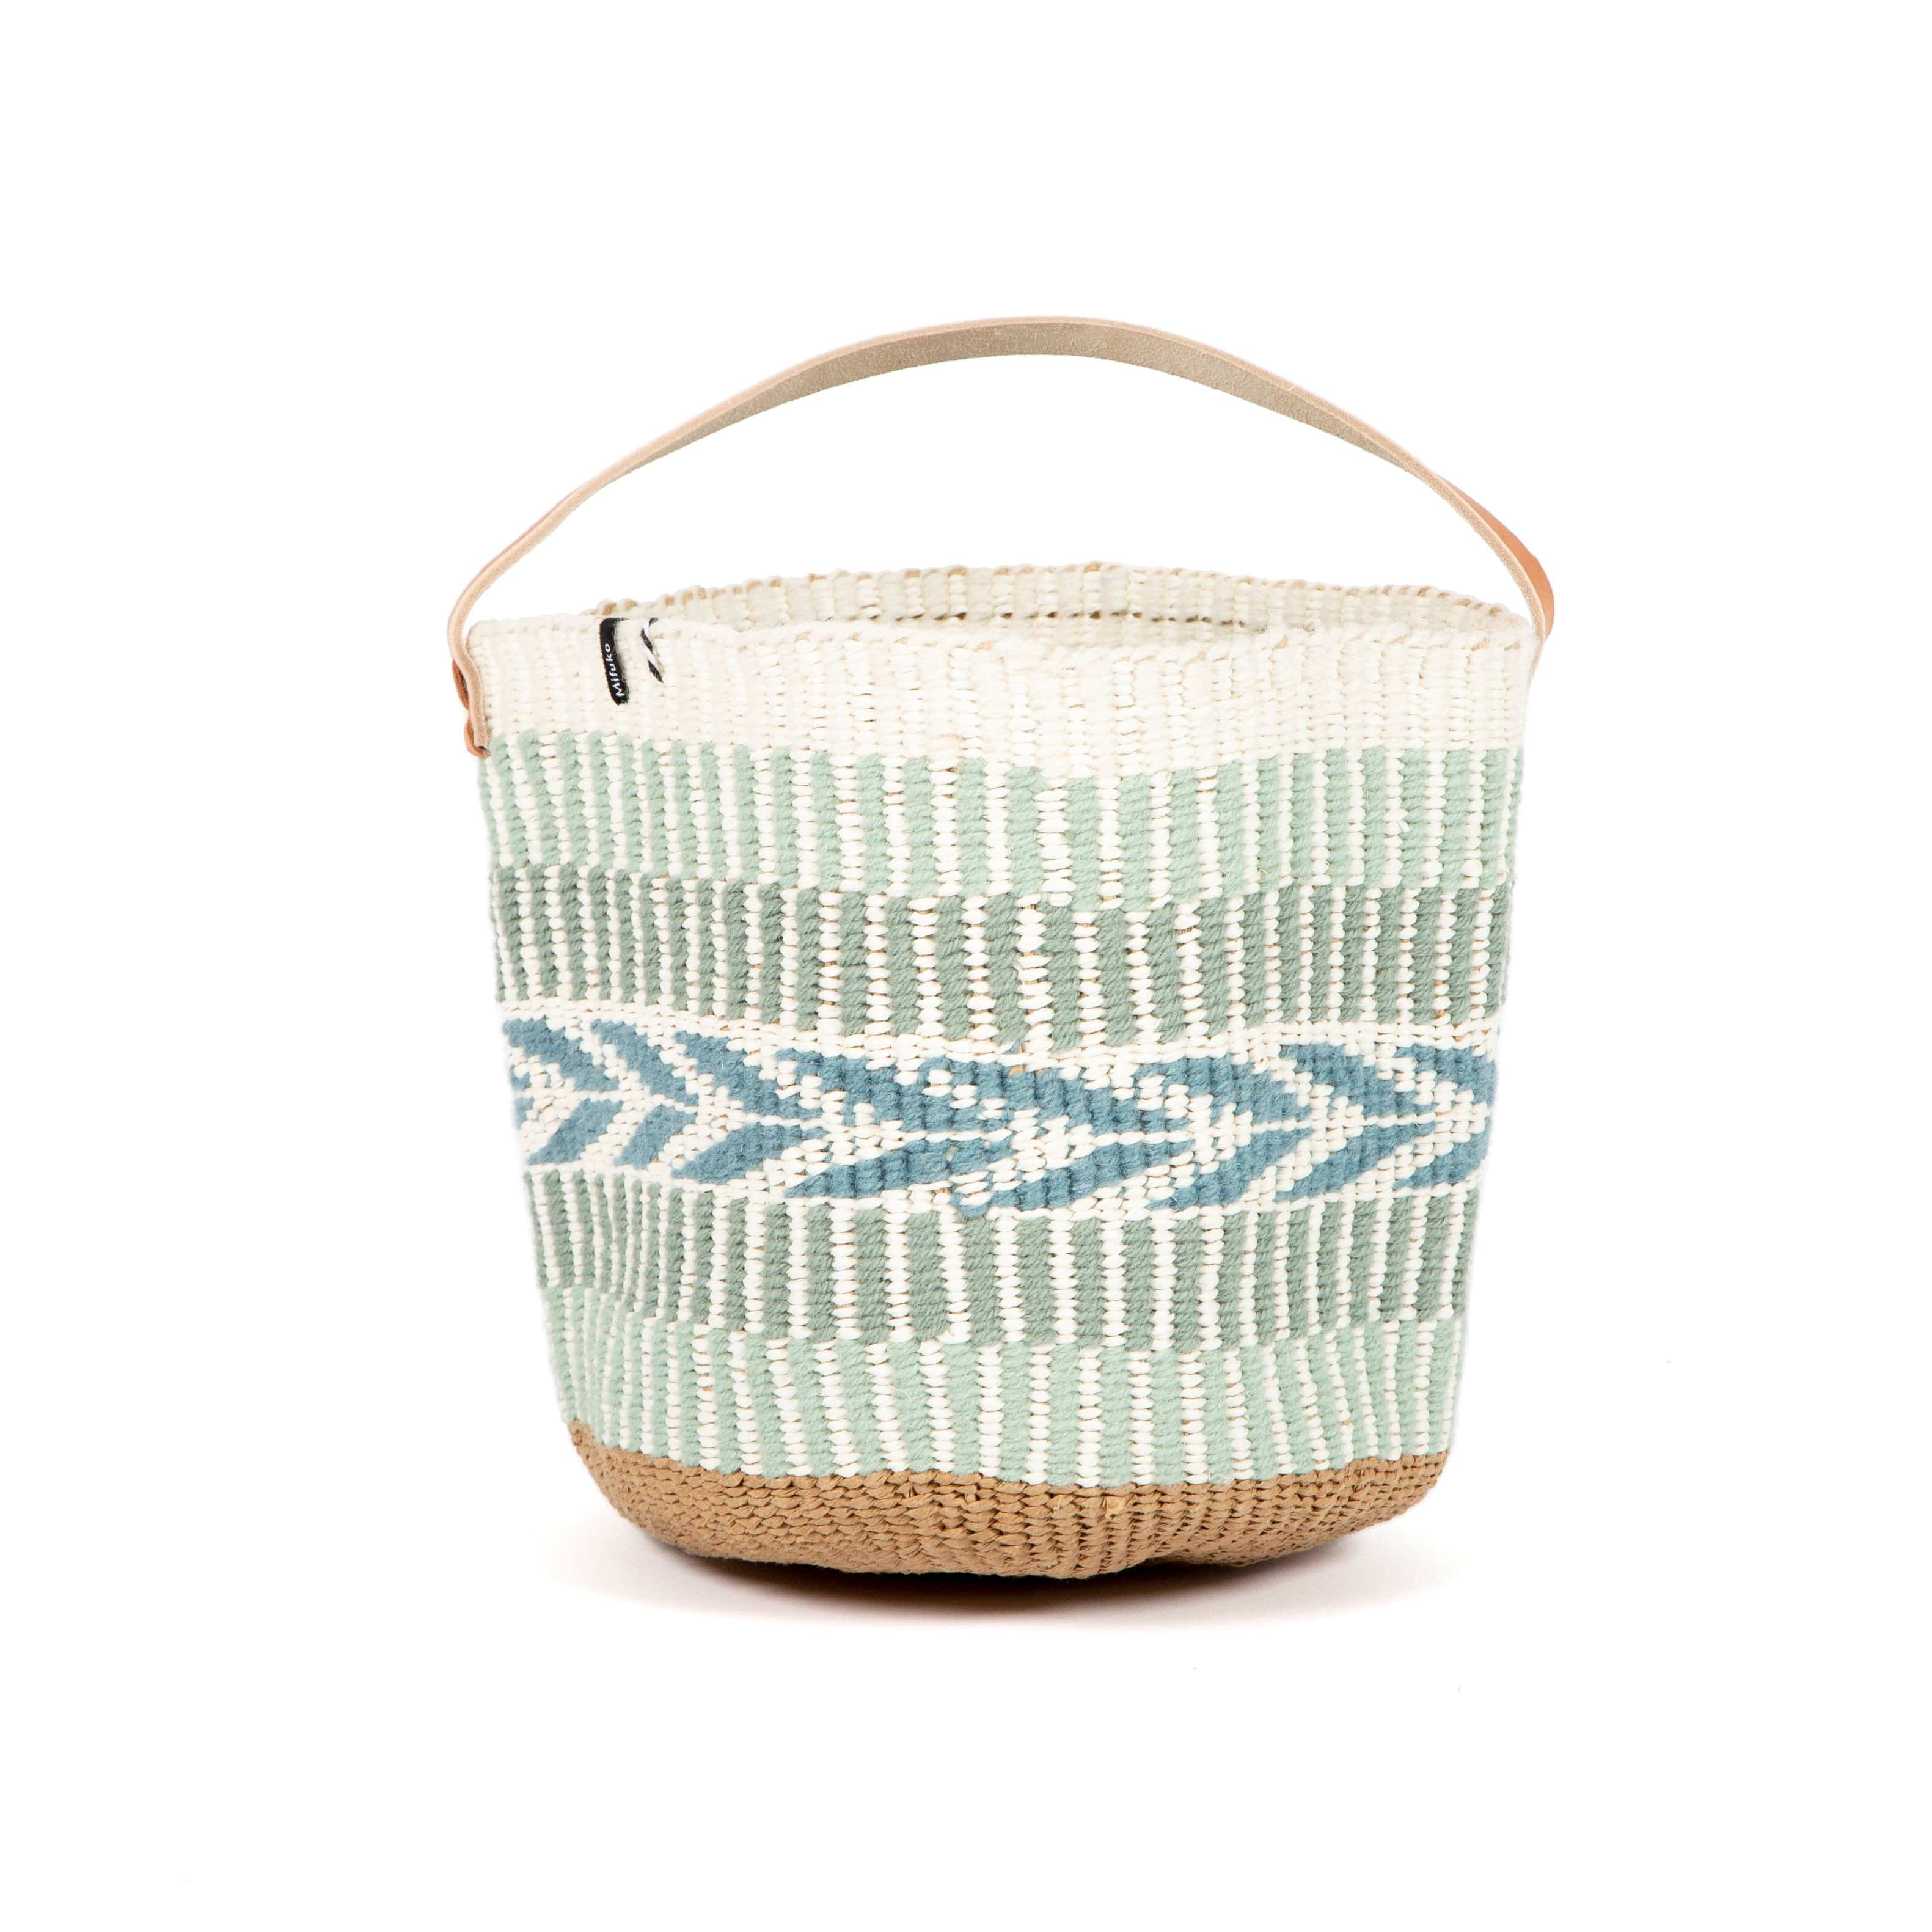 Mifuko Wool and paper Small basket with short handle Pamba basket with handle | Light green pattern weave S